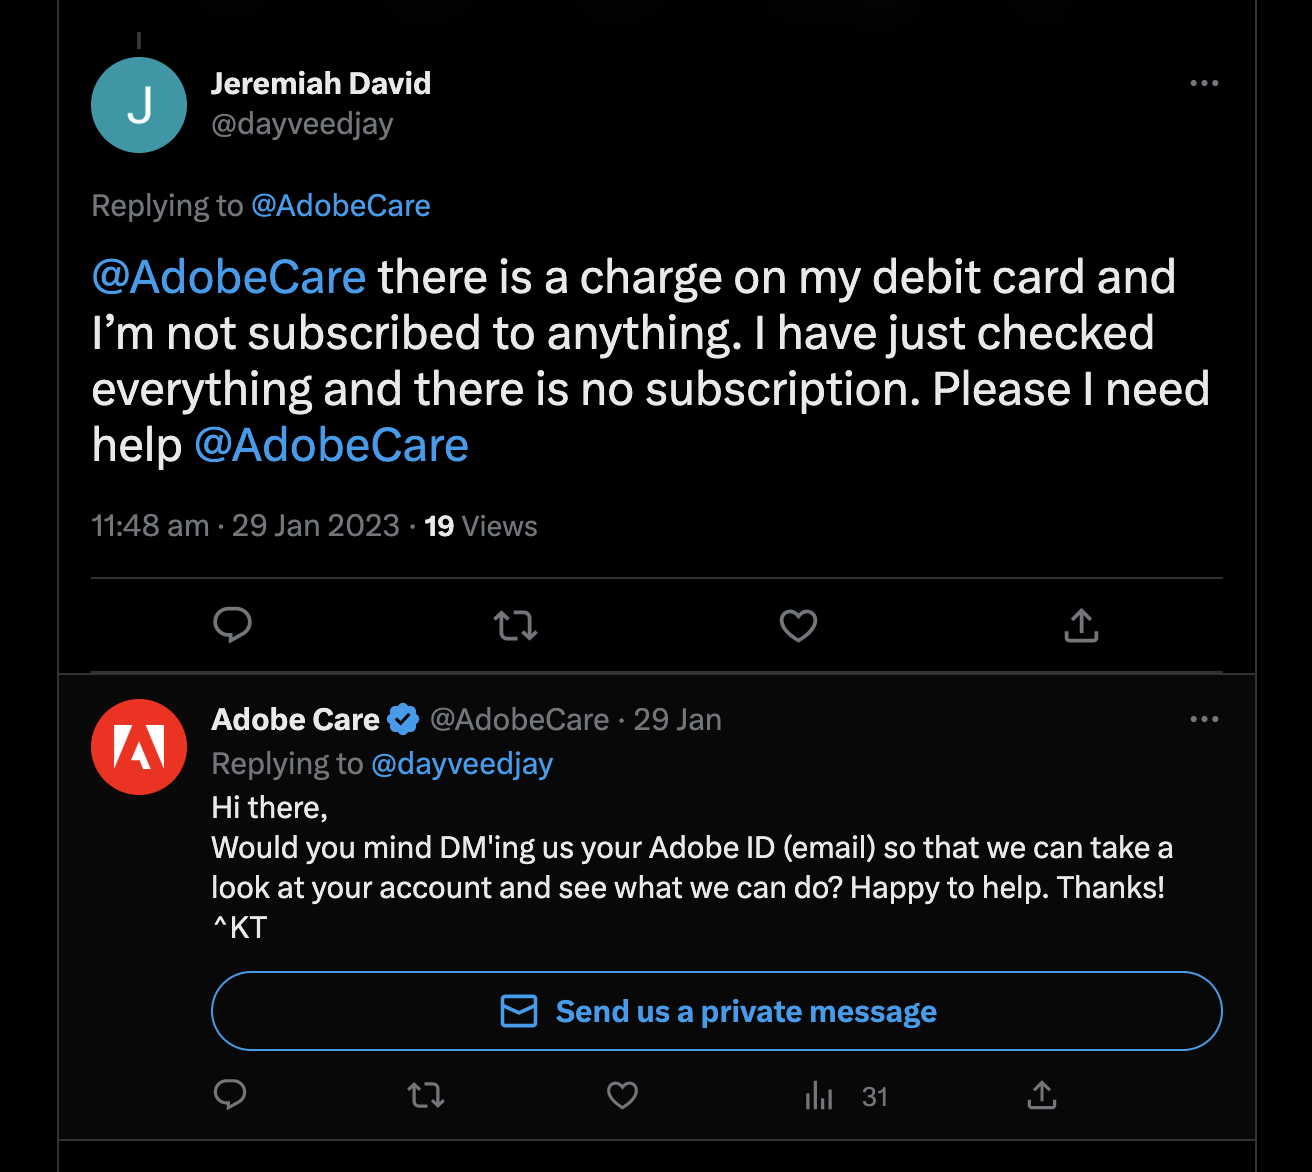 An image showing Adobe's Twitter handle quickly responding to a user's tweet seeking help